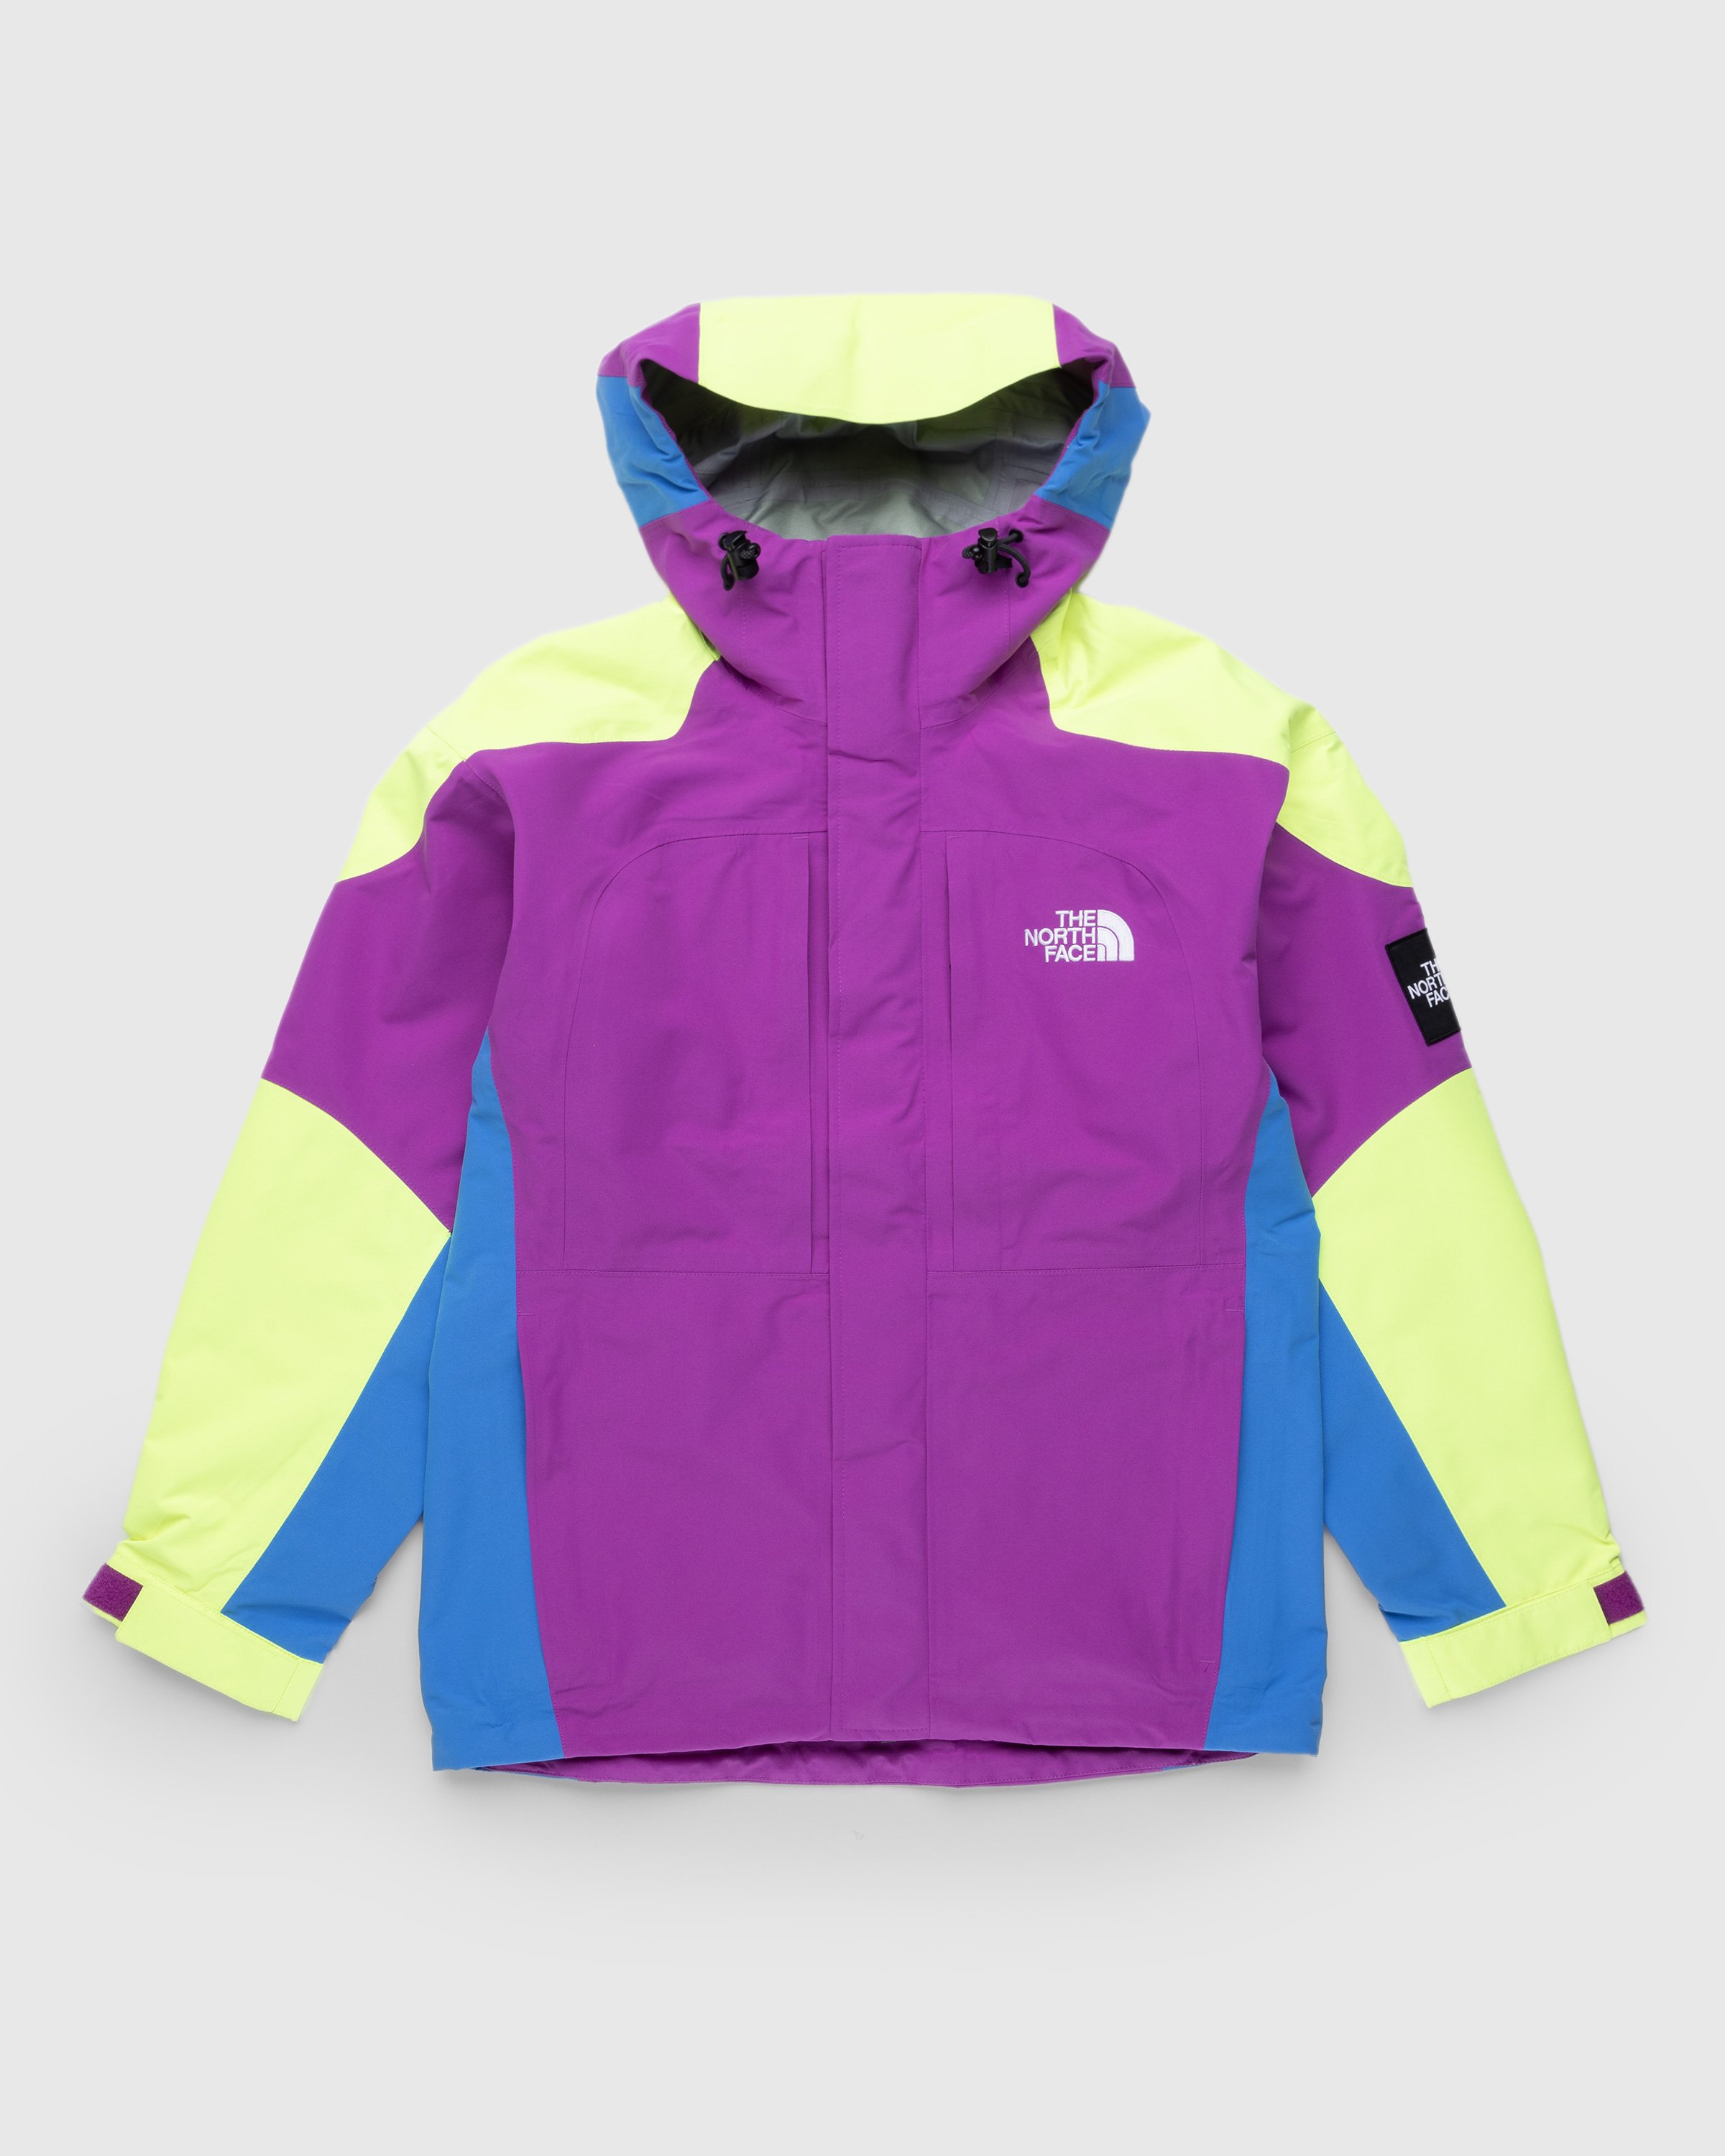 The North Face - 3L DryVent Carduelis Jacket Purple Cactus Flower/LED Yellow/Super Sonic Blue - Clothing - Multi - Image 1